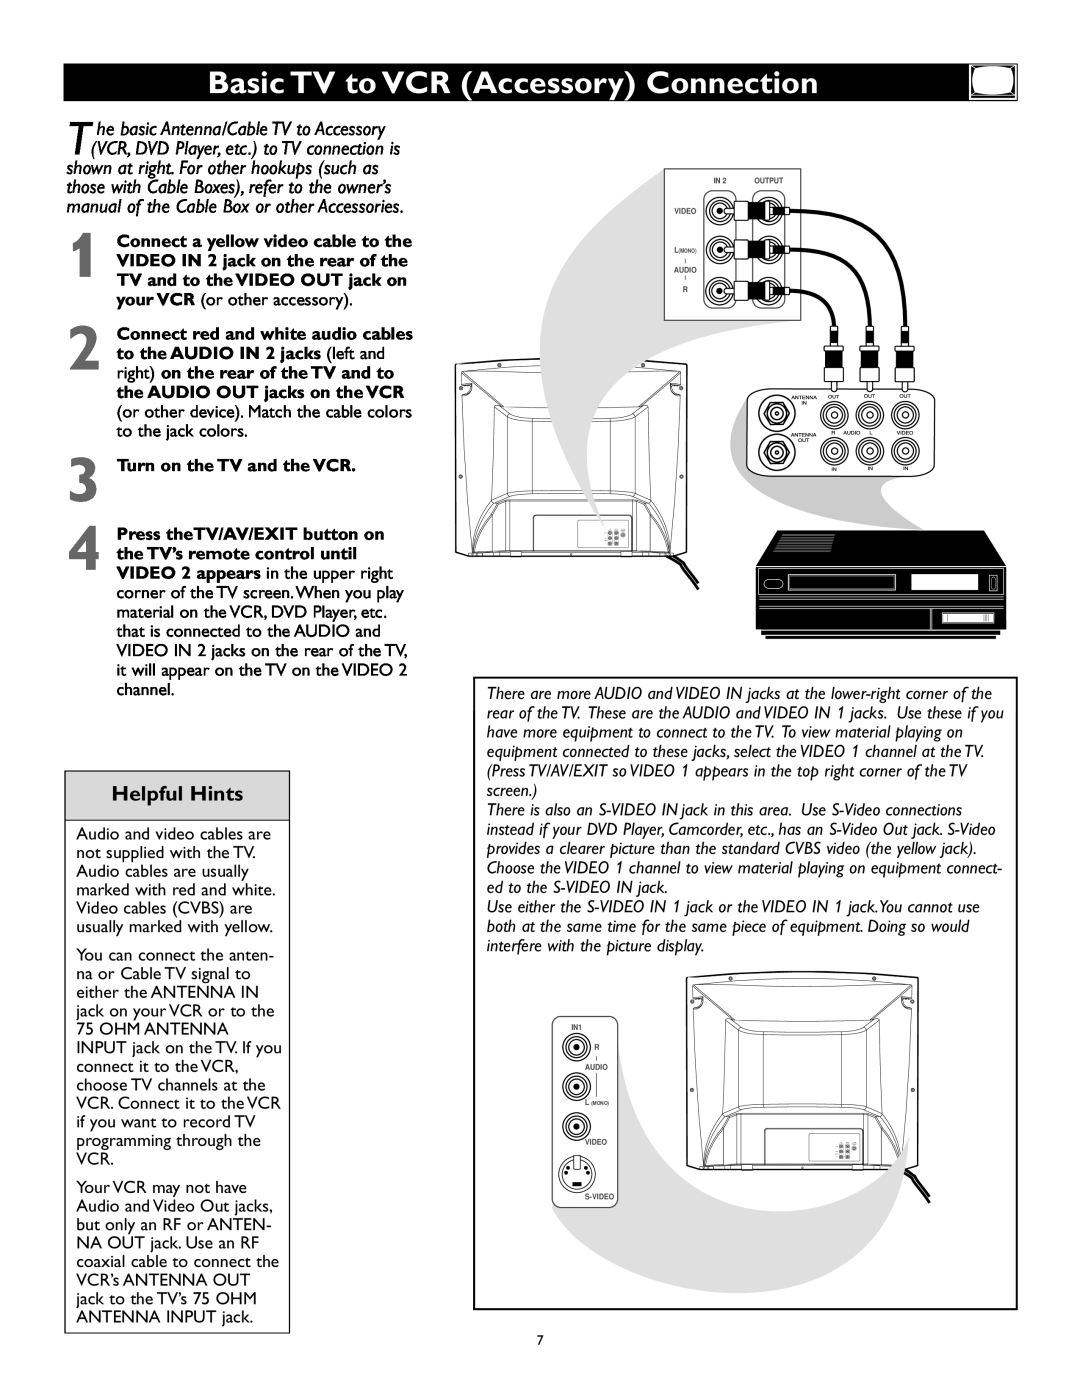 Magnavox 27MS343S owner manual Basic TV to VCR Accessory Connection, Helpful Hints, Turn on the TV and the VCR 